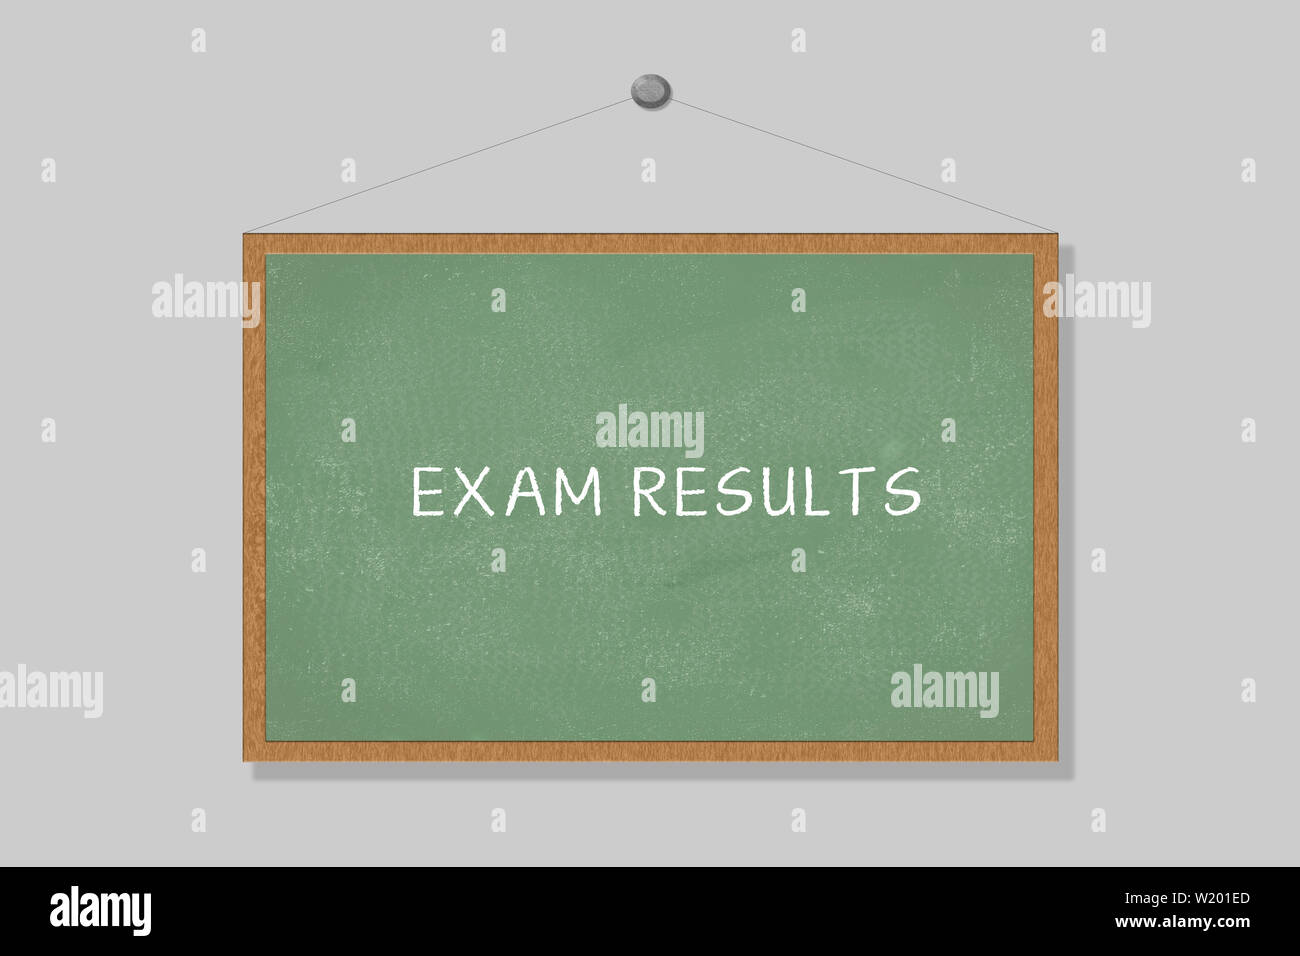 School exams concept with exam Results word on greenboard hanged on wall Stock Photo